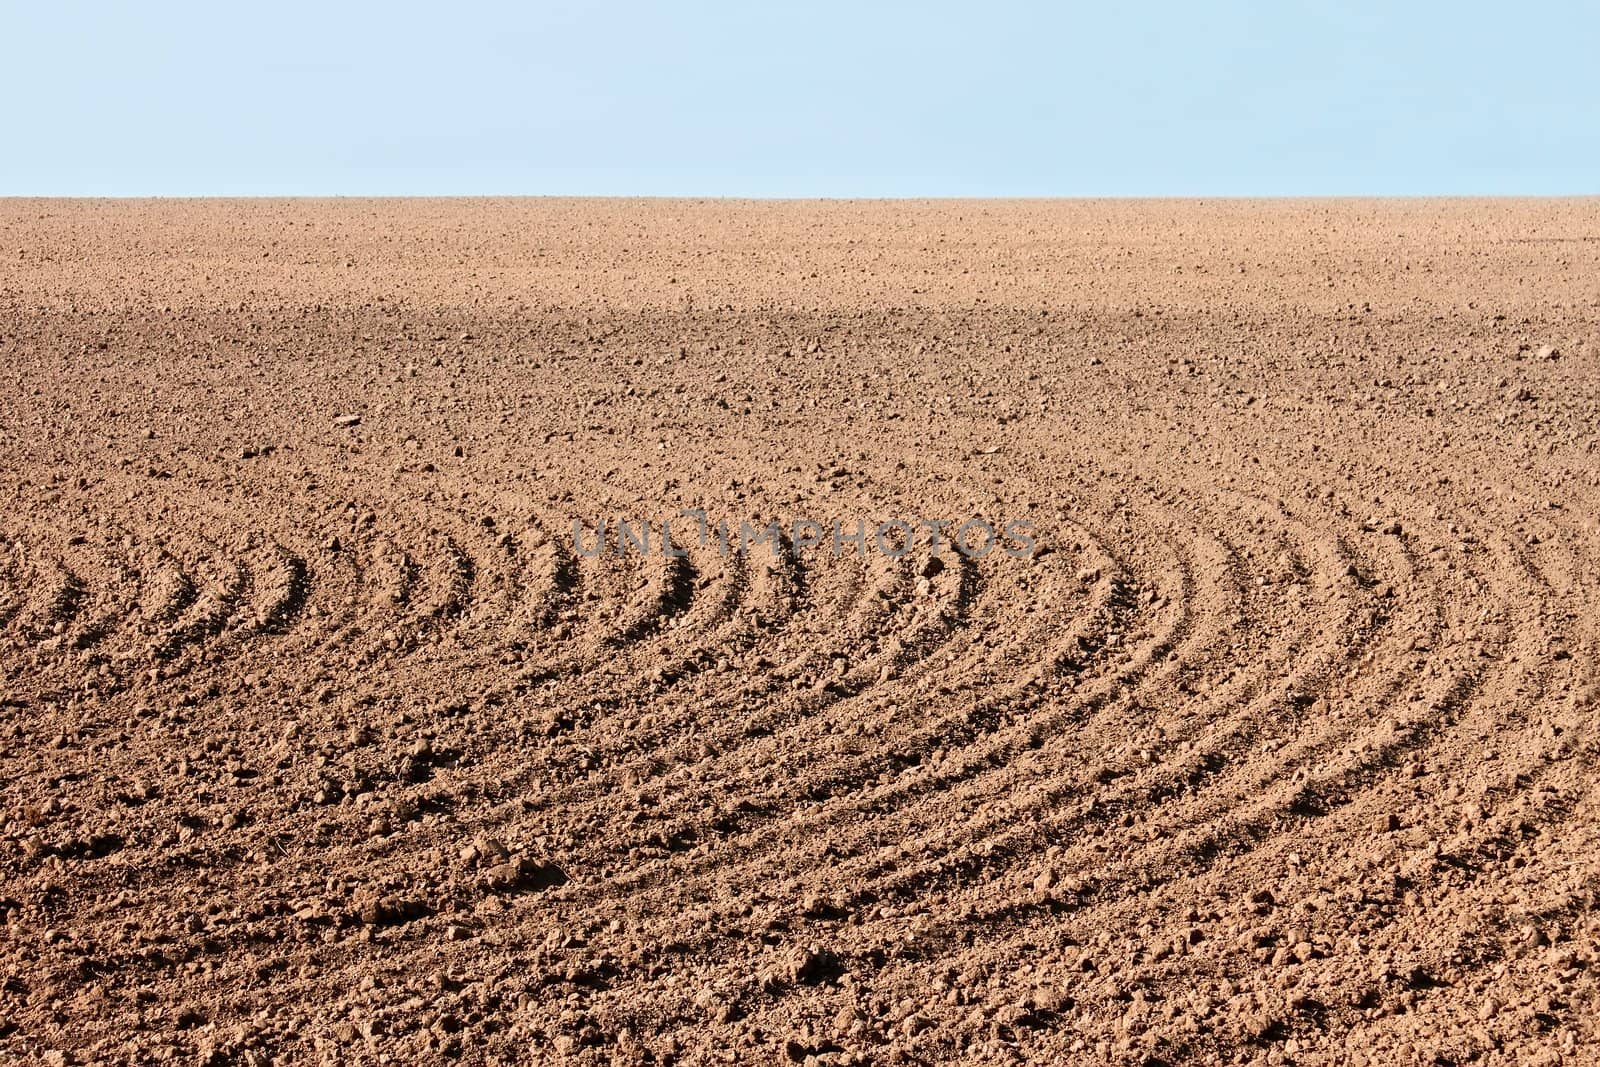 Rural landscape with parallel curved furrows on autumn field that prepared for the next season